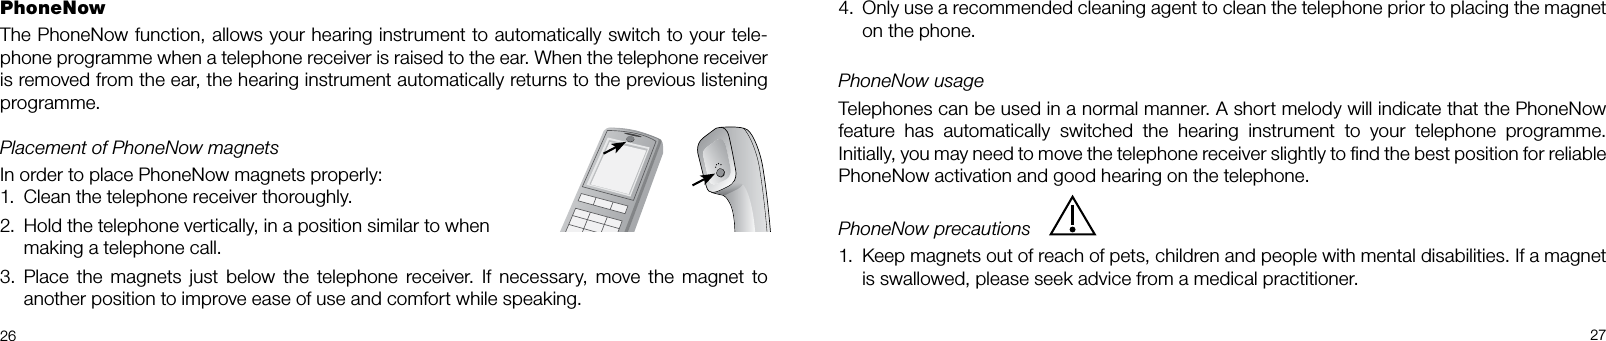  2627Only use a recommended cleaning agent to clean the telephone prior to placing the magnet 4. on the phone.PhoneNow usageTelephones can be used in a normal manner. A short melody will indicate that the PhoneNow feature  has  automatically  switched  the  hearing  instrument  to  your  telephone  programme.  Initially, you may need to move the telephone receiver slightly to ﬁnd the best position for reliable PhoneNow activation and good hearing on the telephone.PhoneNow precautions Keep magnets out of reach of pets, children and people with mental disabilities. If a magnet 1. is swallowed, please seek advice from a medical practitioner.PhoneNow The PhoneNow function, allows your hearing instrument to automatically switch to your tele-phone programme when a telephone receiver is raised to the ear. When the telephone receiver is removed from the ear, the hearing instrument automatically returns to the previous listening programme.Placement of PhoneNow magnetsIn order to place PhoneNow magnets properly:Clean the telephone receiver thoroughly.1. Hold the telephone vertically, in a position similar to when  2. making a telephone call.Place the  magnets  just below  the  telephone  receiver.  If  necessary,  move  the  magnet  to 3. another position to improve ease of use and comfort while speaking. 